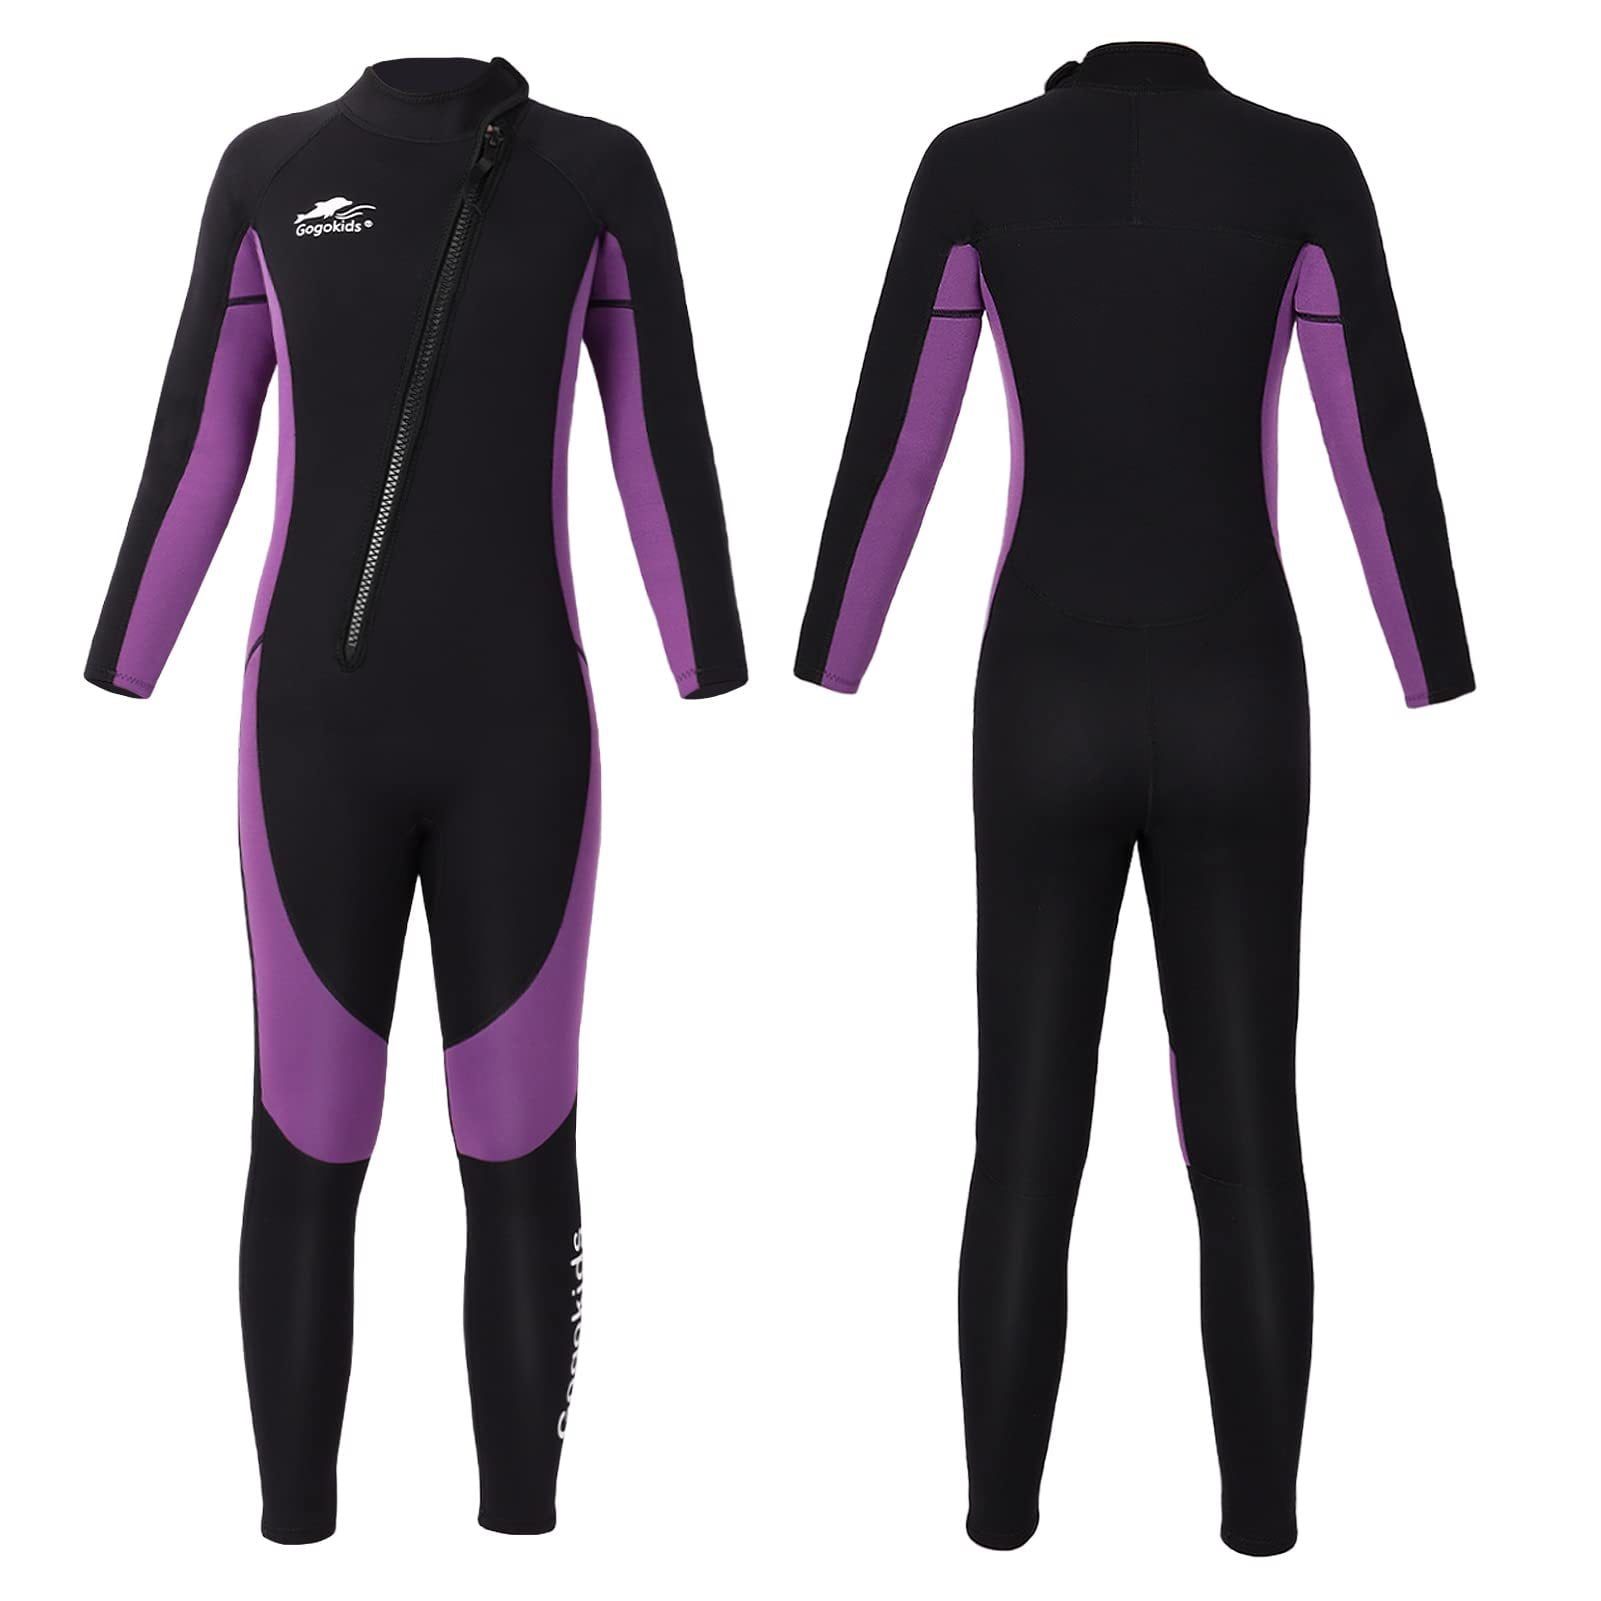 Gogokids Kids Wetsuit 2.5mm Neoprene Youth Thermal Long Sleeves UV  Protection Wet Suit Diving Suit for Swimming Surf Snorkeling,Purple 